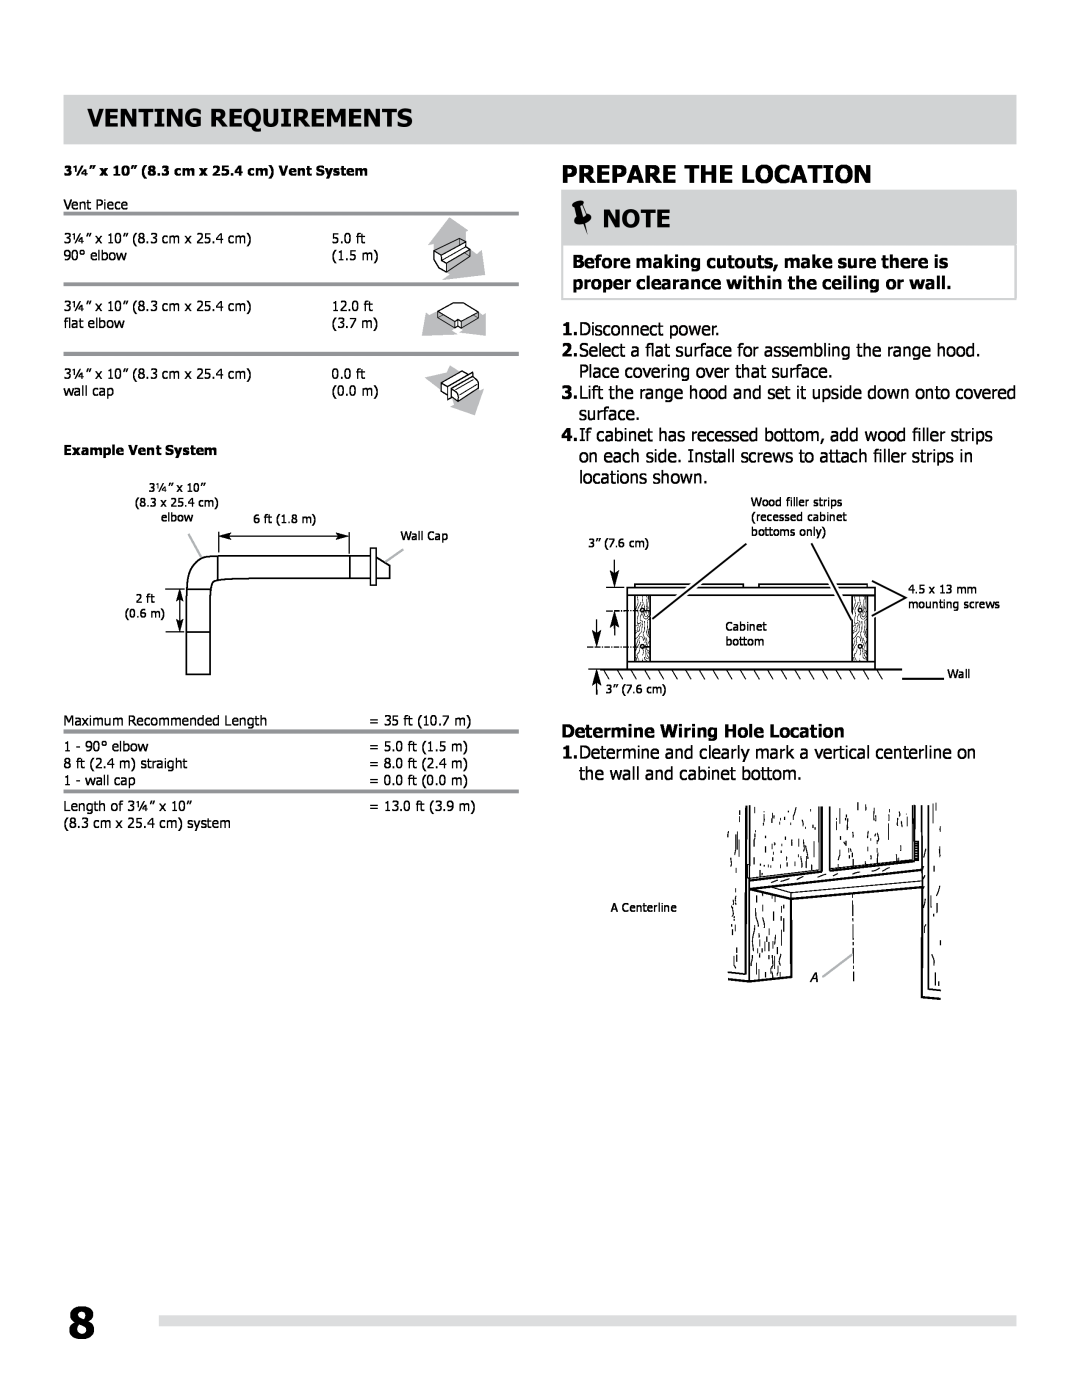 Frigidaire LI30KC/316902495 manual Prepare The Location, Determine Wiring Hole Location, Venting Requirements 